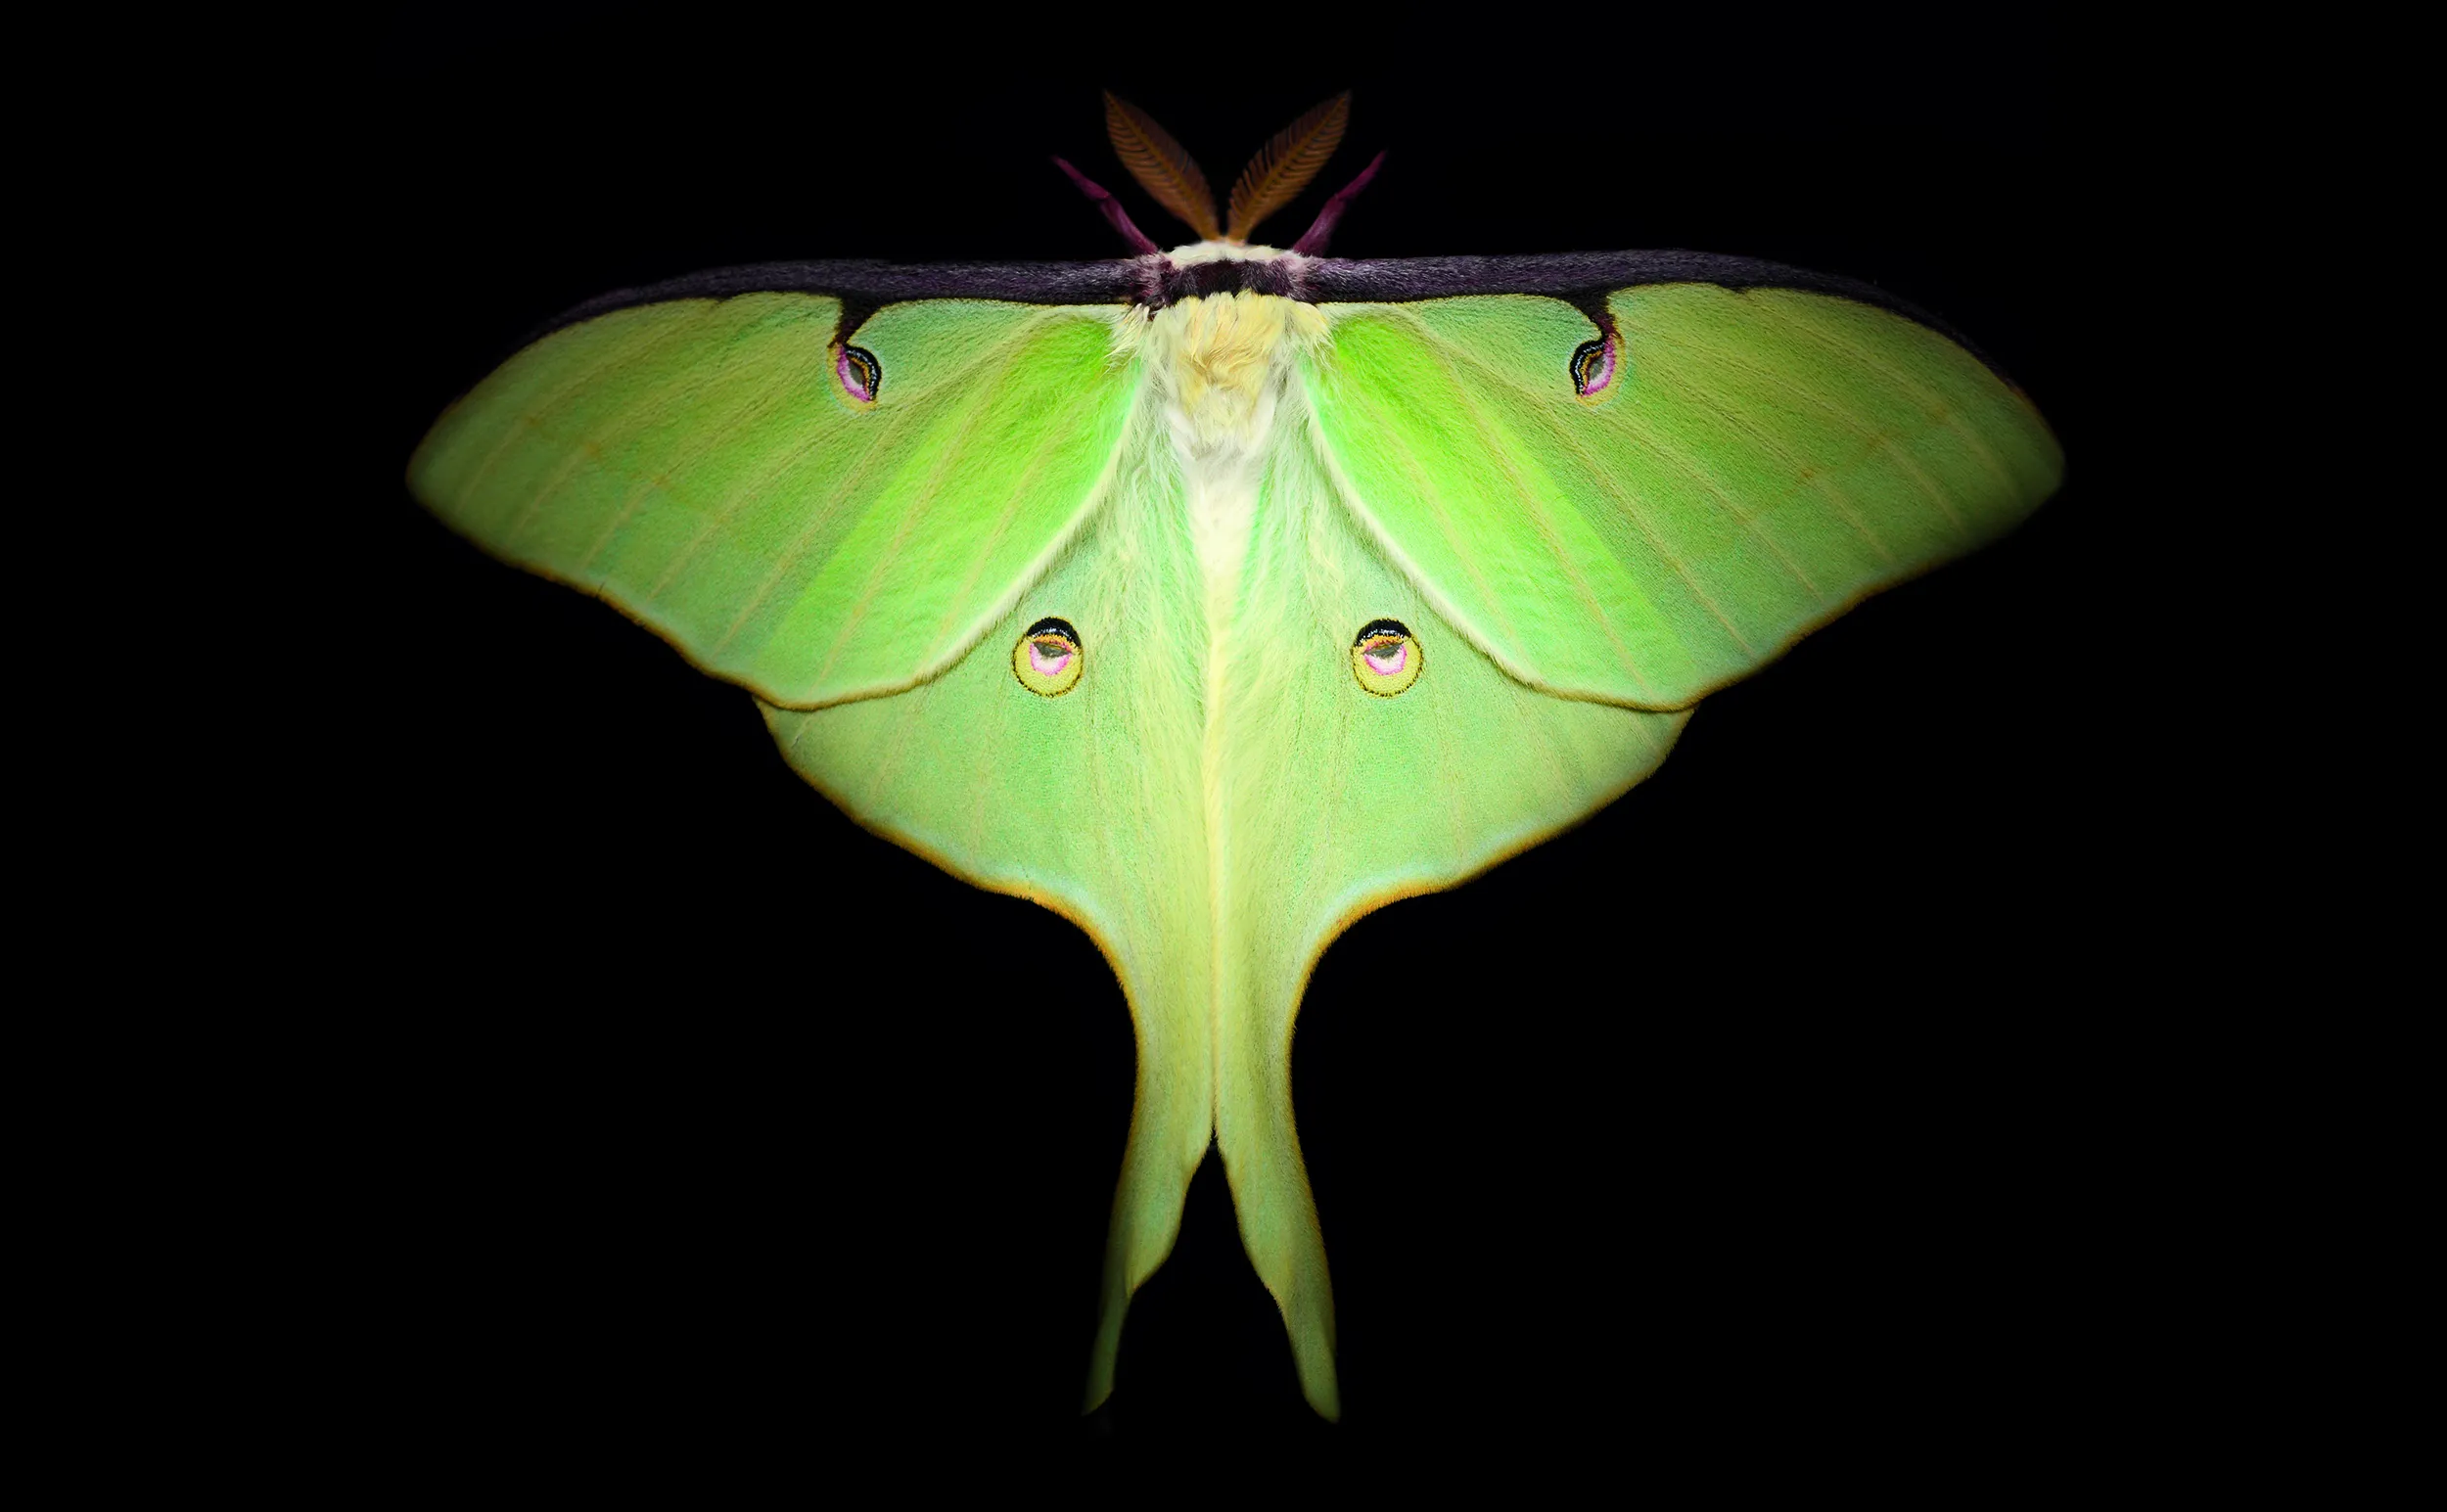 Next picture →. The luna moth is one of the largest moths in North America